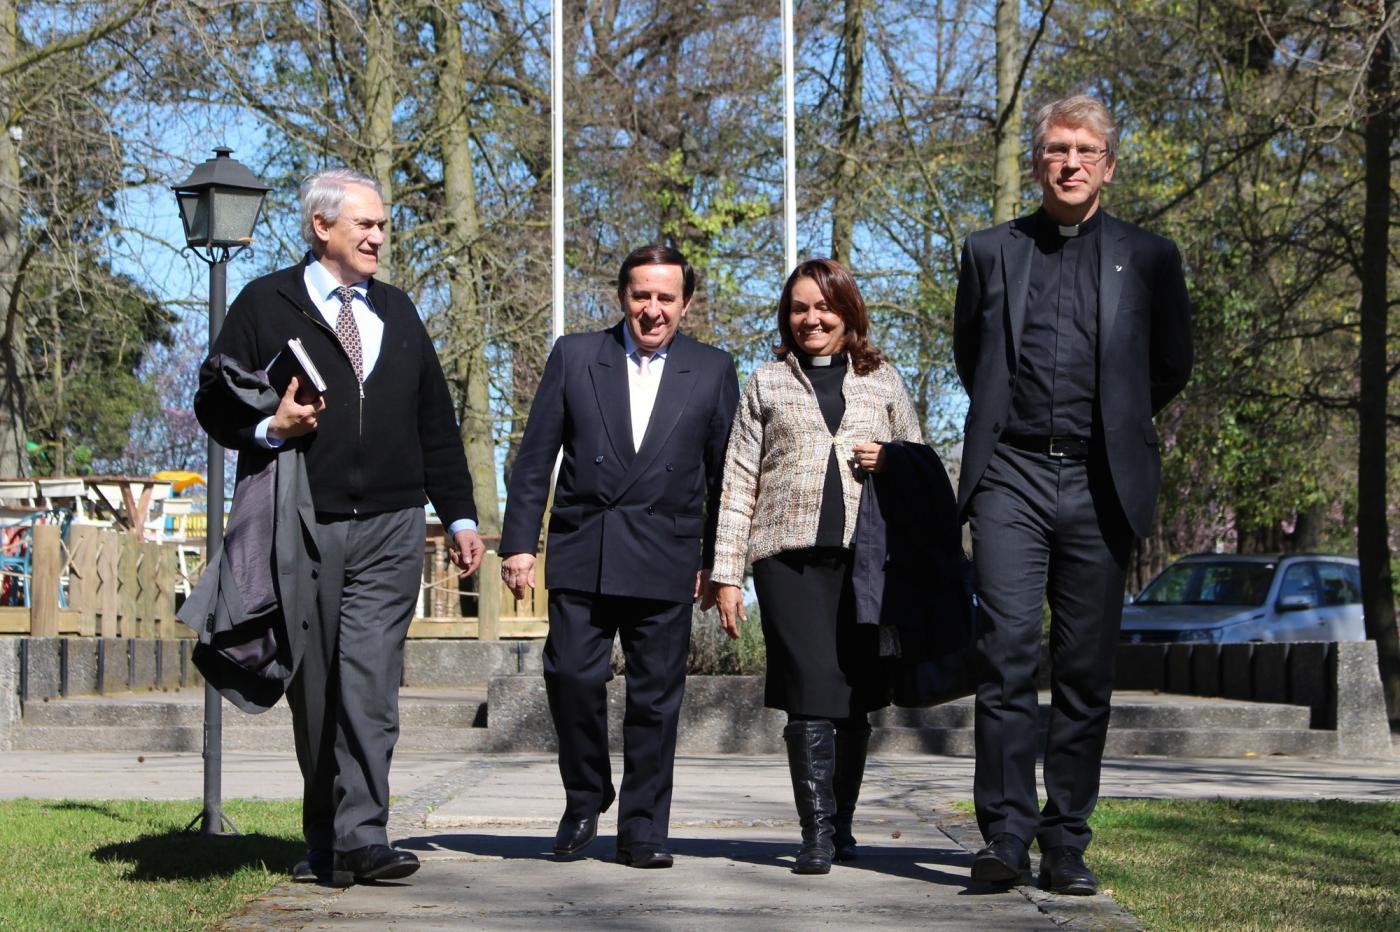 From left to right: Dr Oscar Corvalan, ecumenical officer at the Pentecostal Church of Chile, Bishop Luis Ulises Muñoz Moraga, head of the church, Rev. Gloria Ulloa and Rev. Dr Olav Fykse Tveit. © WCC/Marcelo Schneider